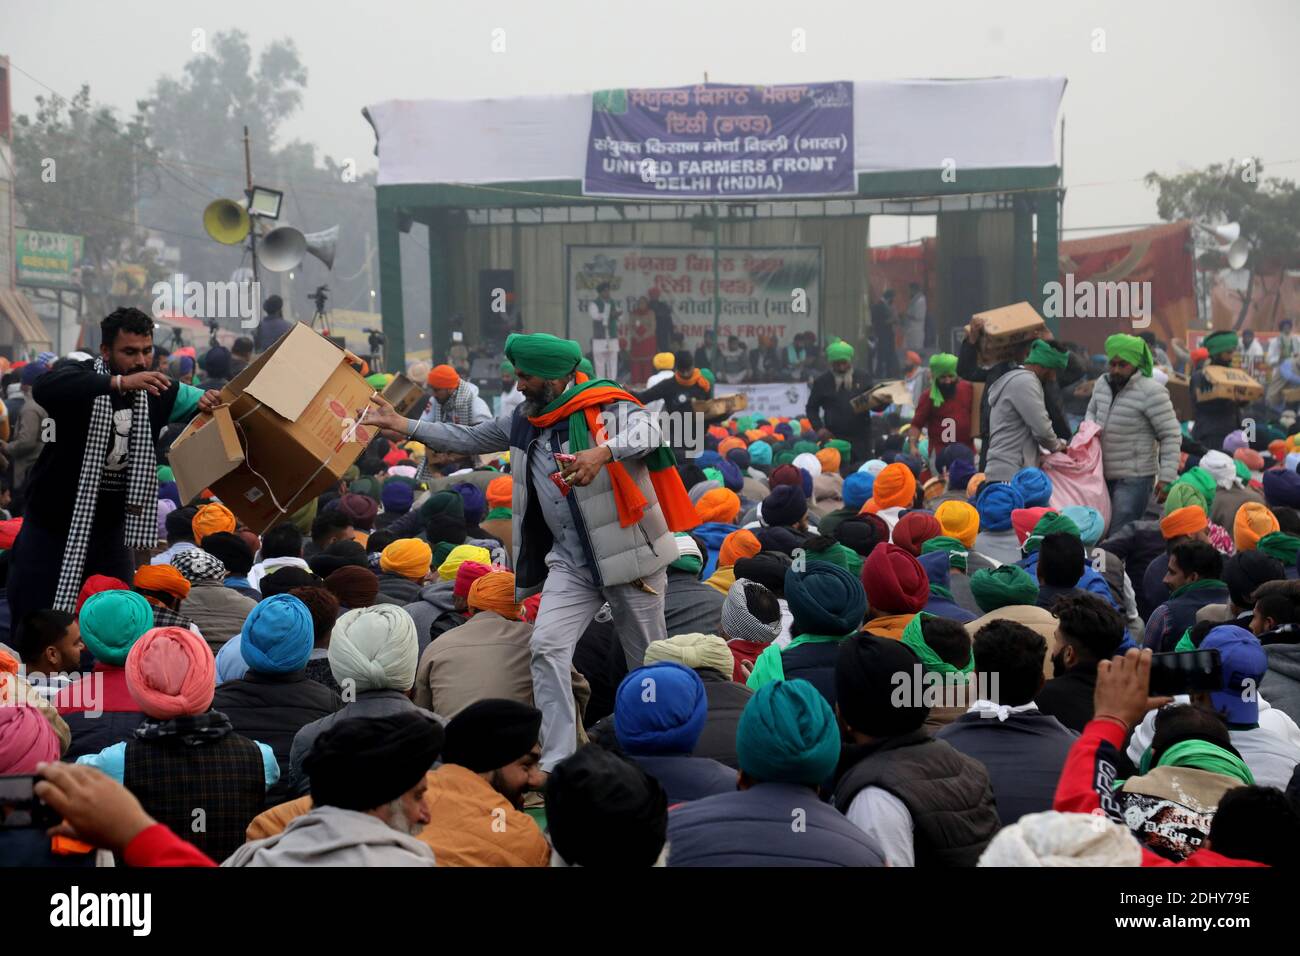 Protesters gathering during the demonstration.Thousands of farmers from Punjab, Haryana and Uttar Pradesh blocked Singhu border (Delhi-Haryana Highway), Ghazipur border (Delhi-Meerut Highway), Tikri border and Gurugram Border agitating for the 17 days. Against the Centre's new farm reform laws.  Indian Union Minister of Agriculture and Farmers Welfare, Narendra Singh Tomar appeals to farmers to end their protest and work with the government. Stock Photo